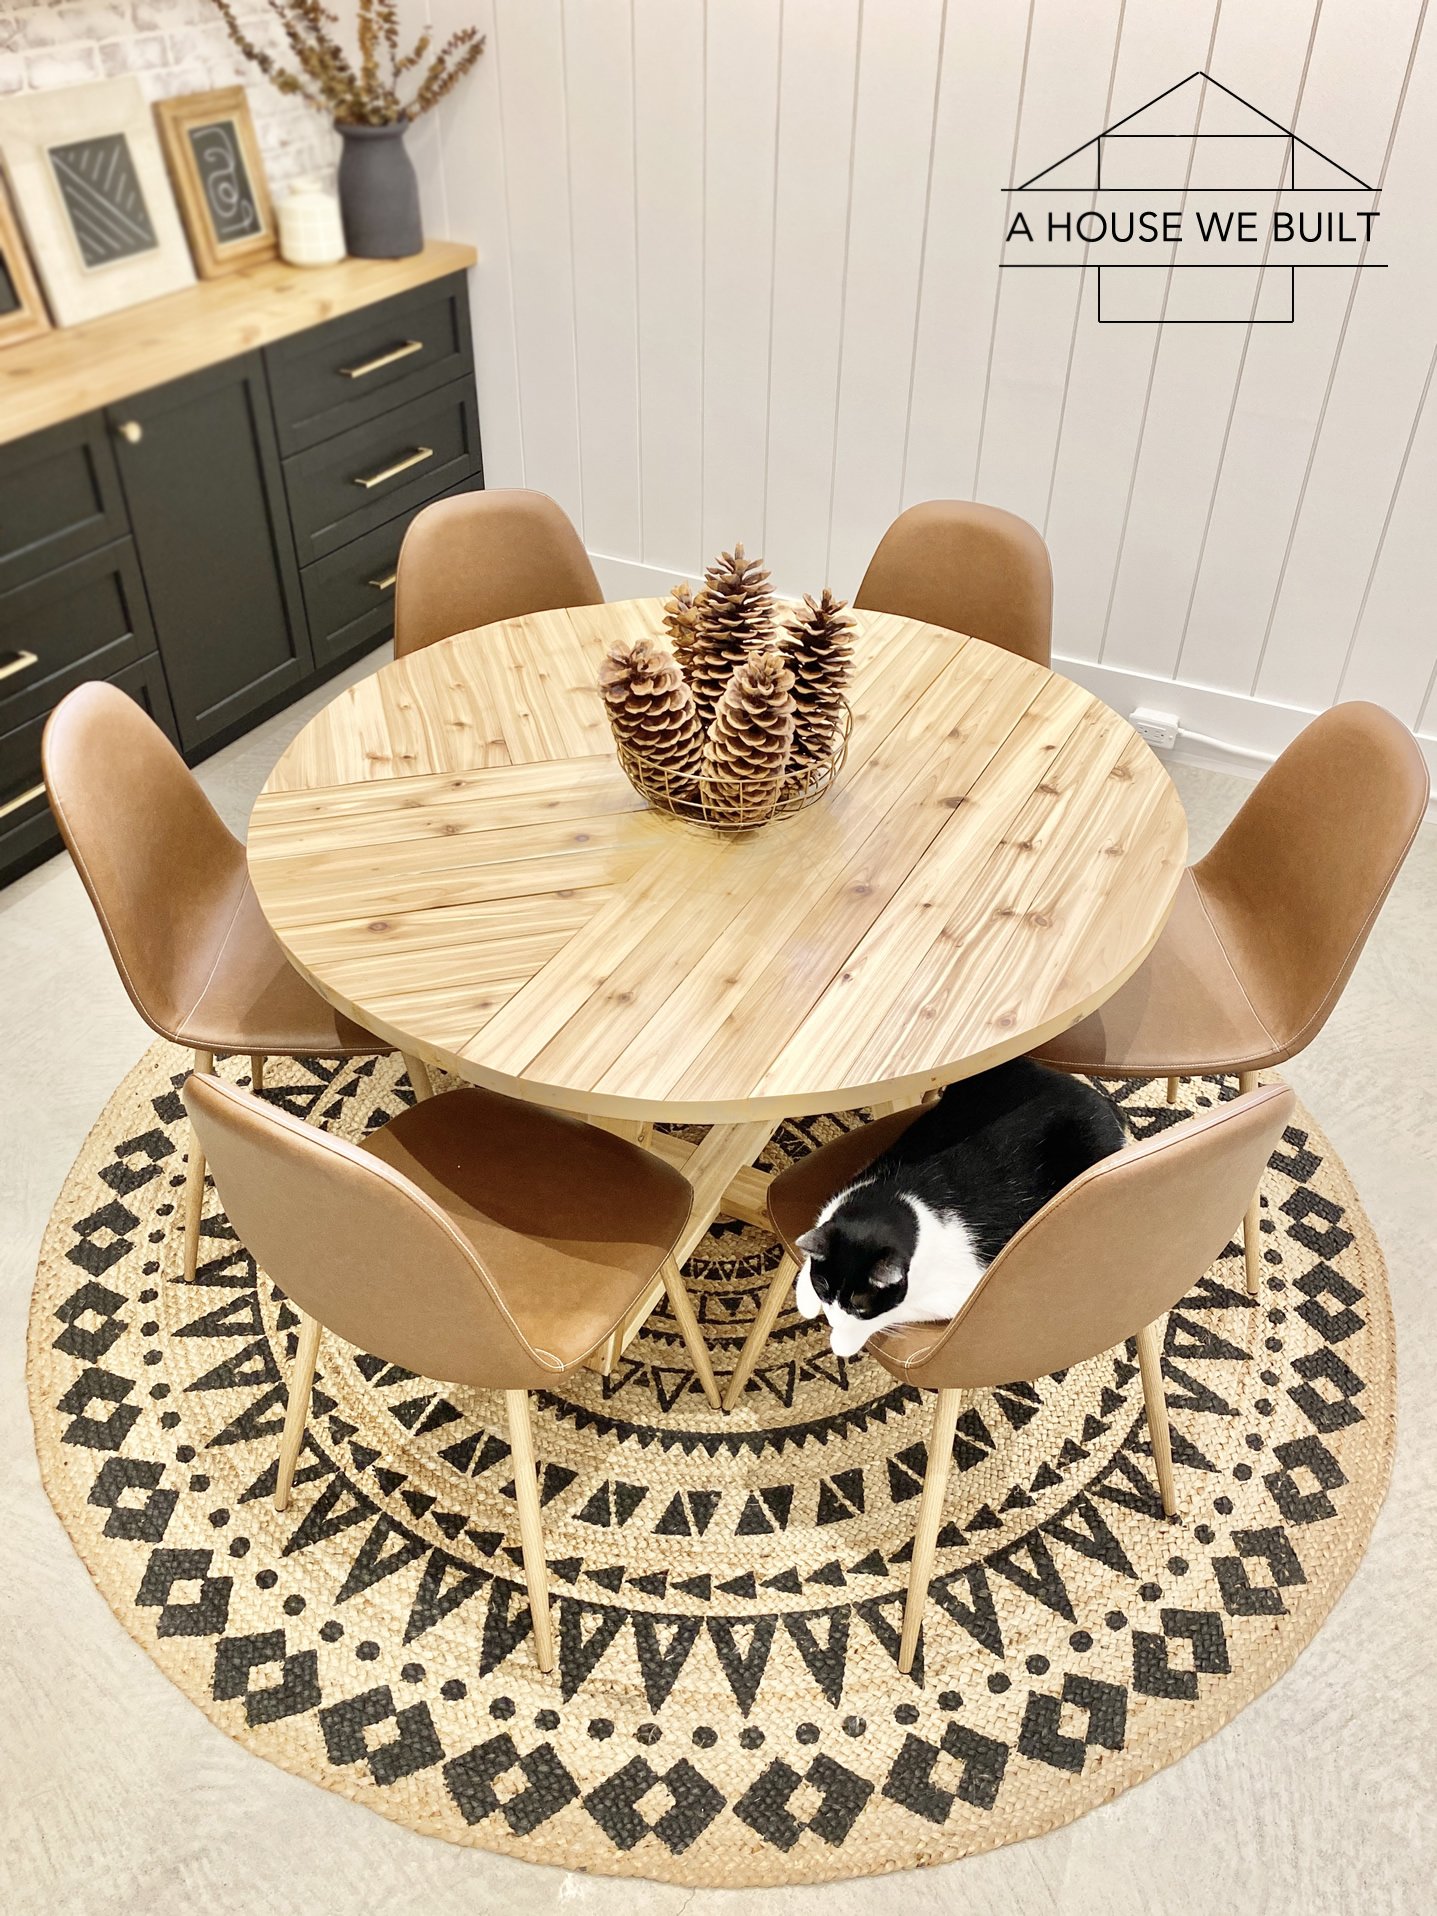 How To Build A Round Table, Round Table Diy Plans